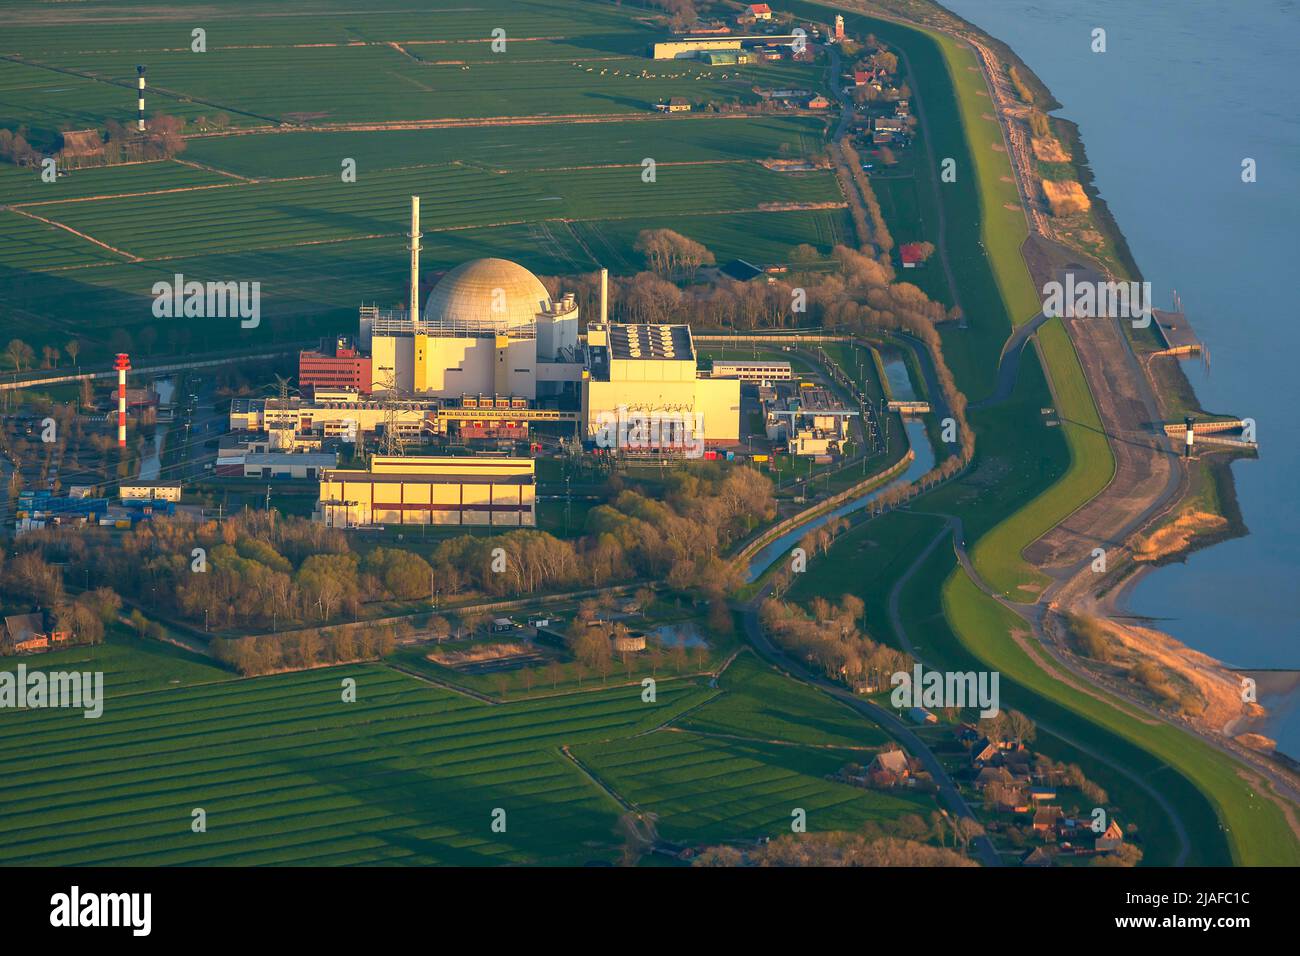 nuclear power station Brokdorf at river Elbe, 18,04.2022, aerial view, Germany, Lower Saxony Stock Photo